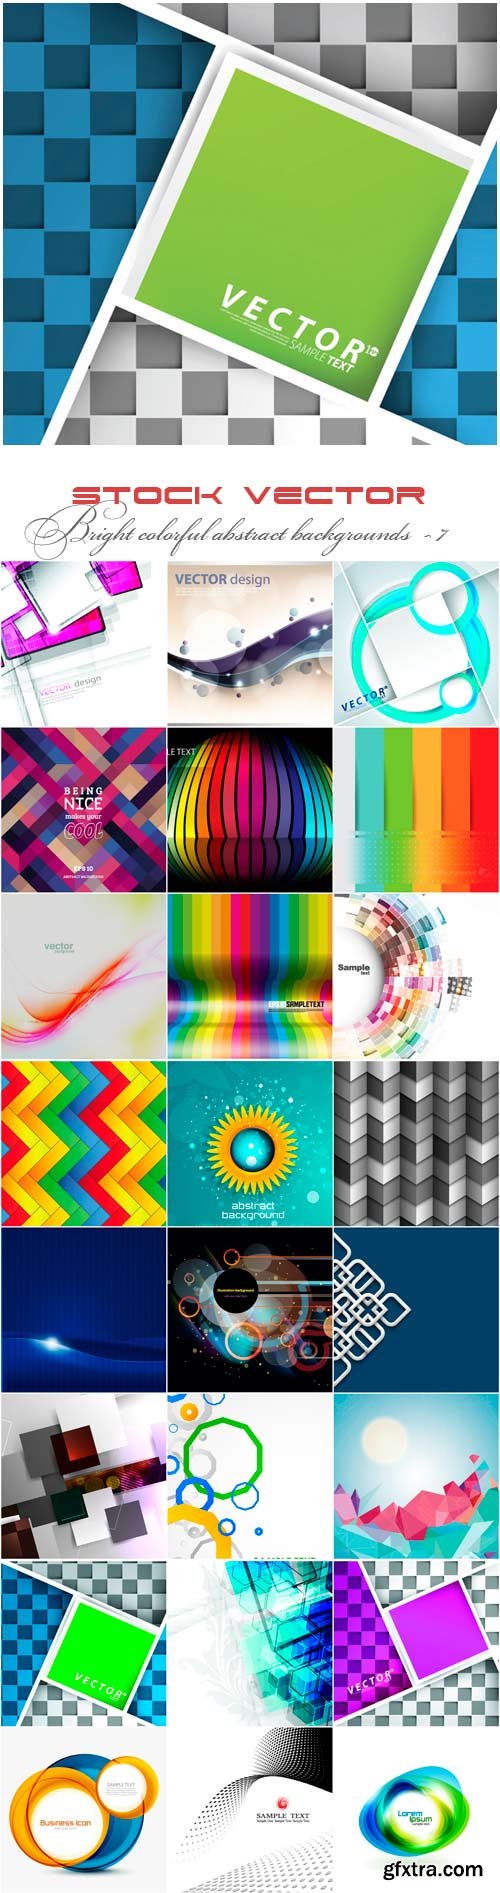 Bright colorful abstract backgrounds vector - 7